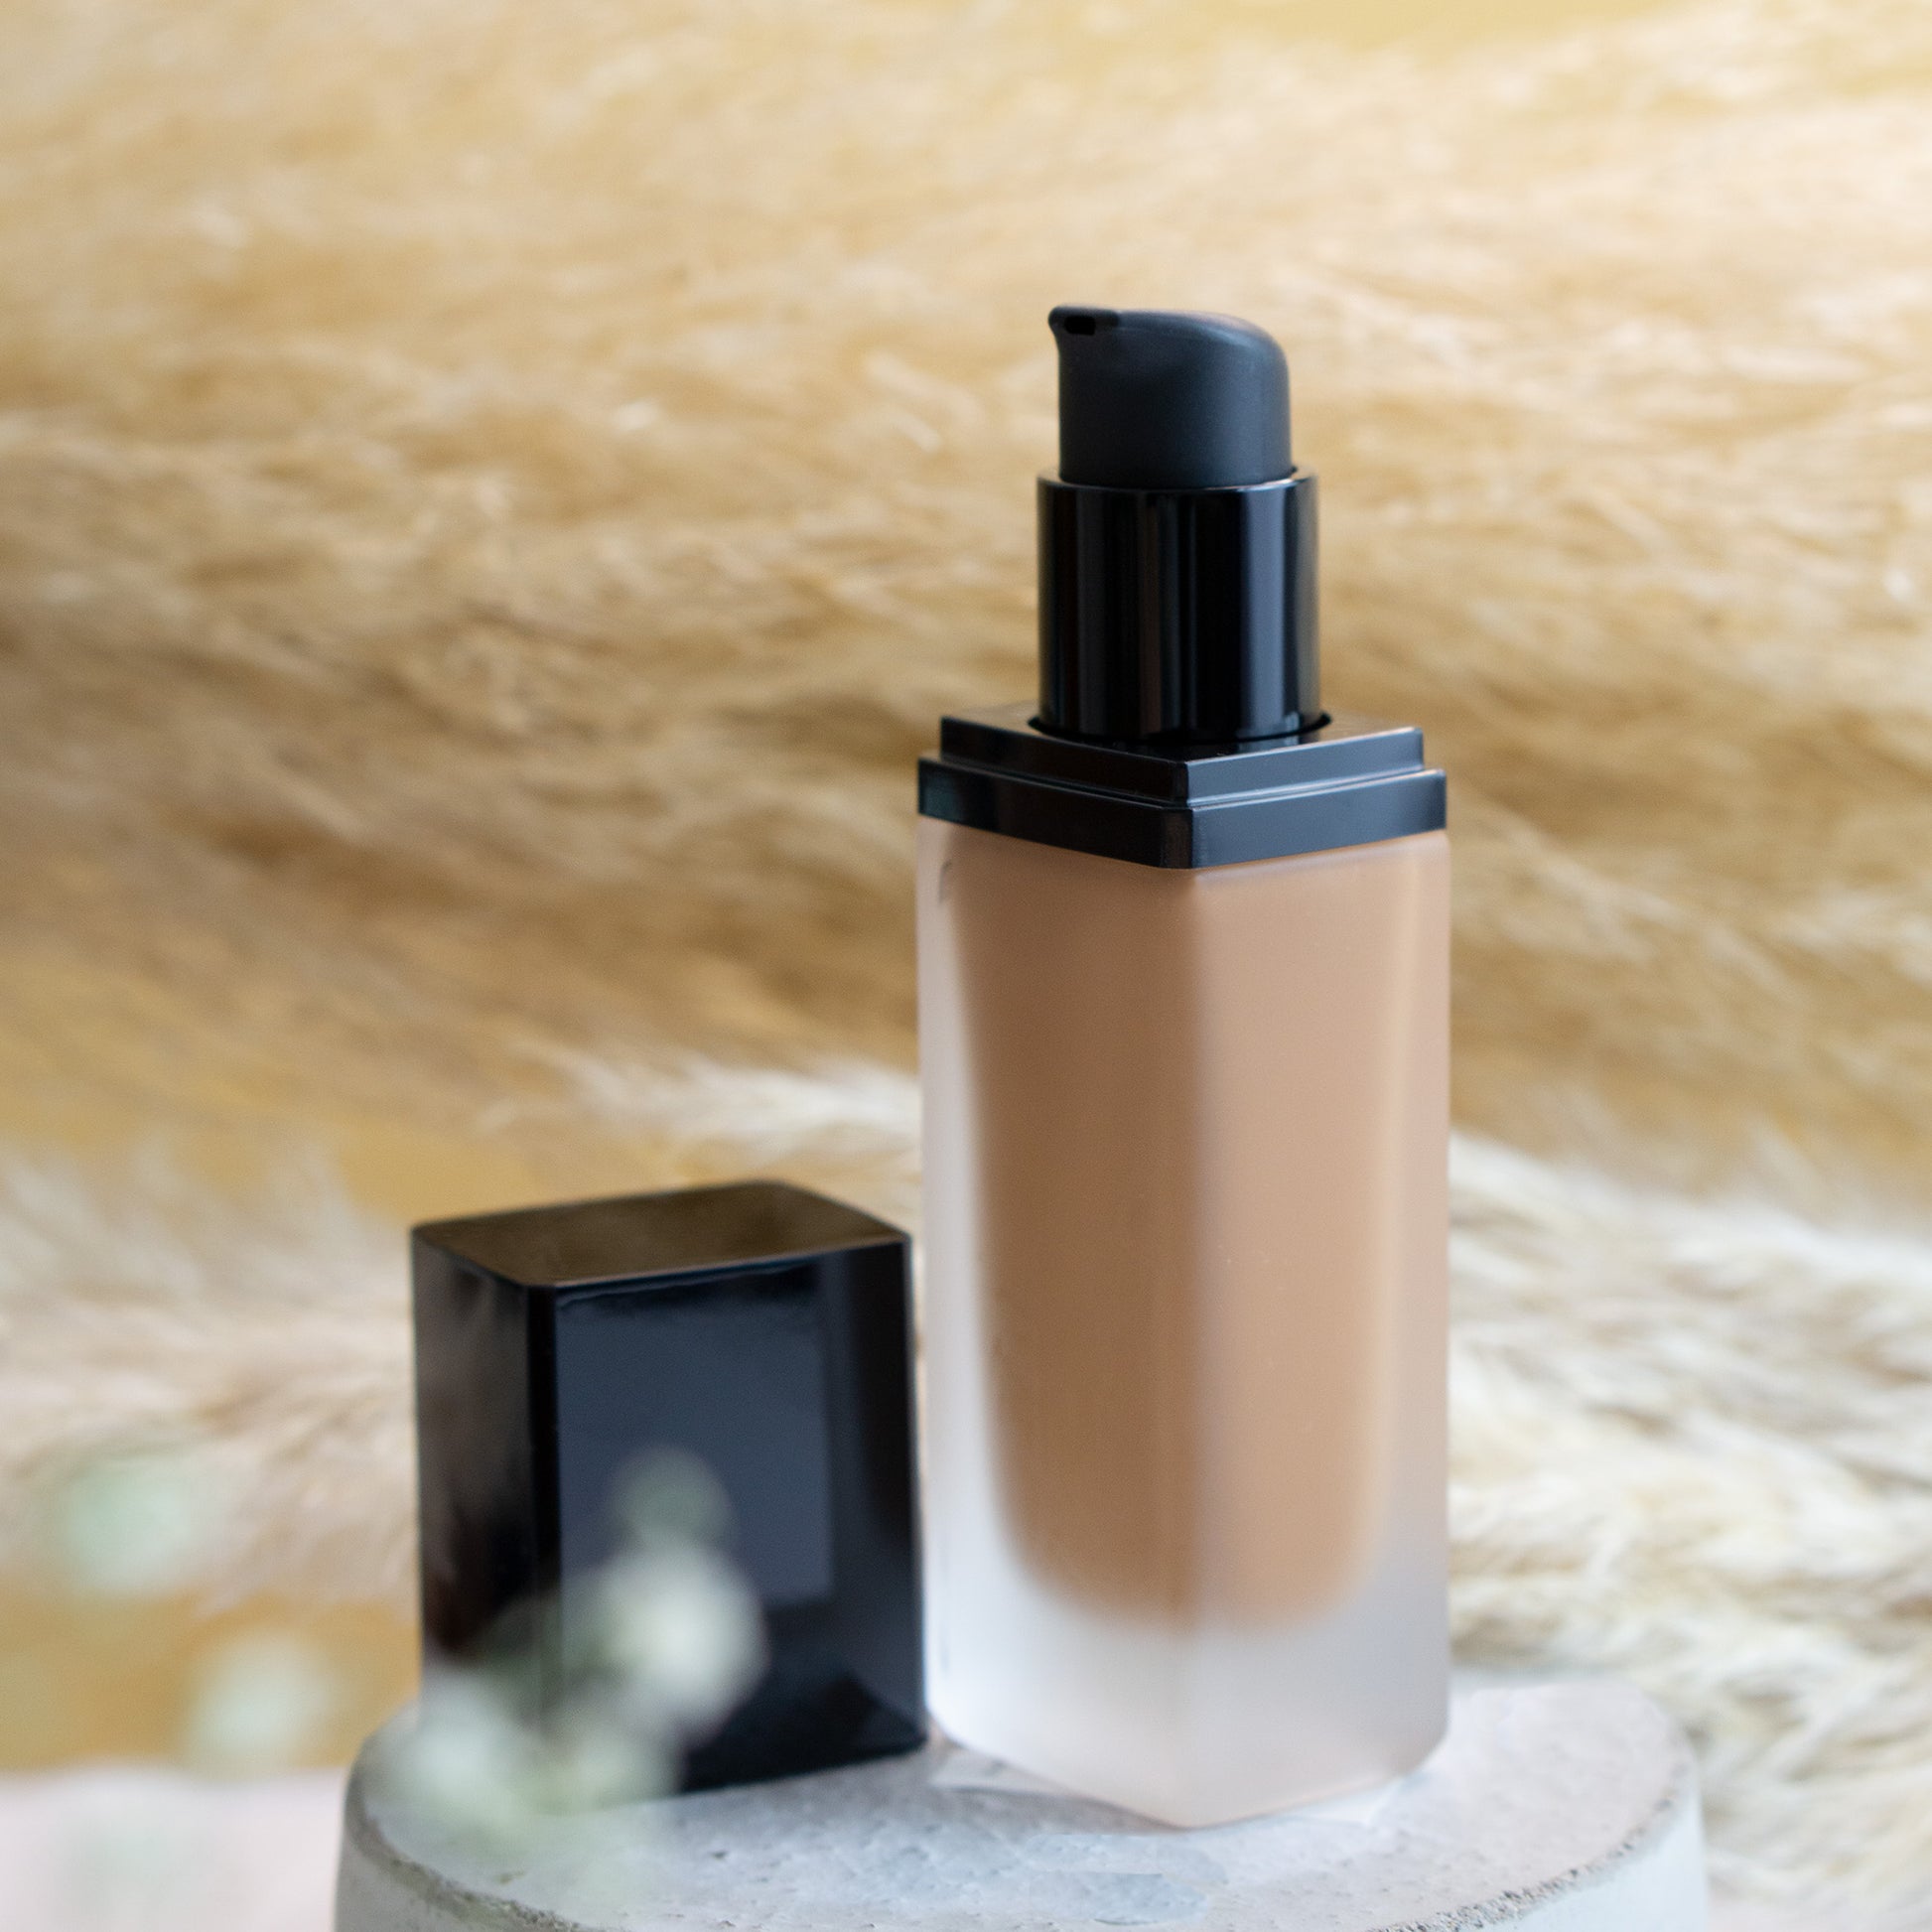 Cruisin Organics Bronze Delight Foundation complements the natural skin splotches with full cover over discoloration.